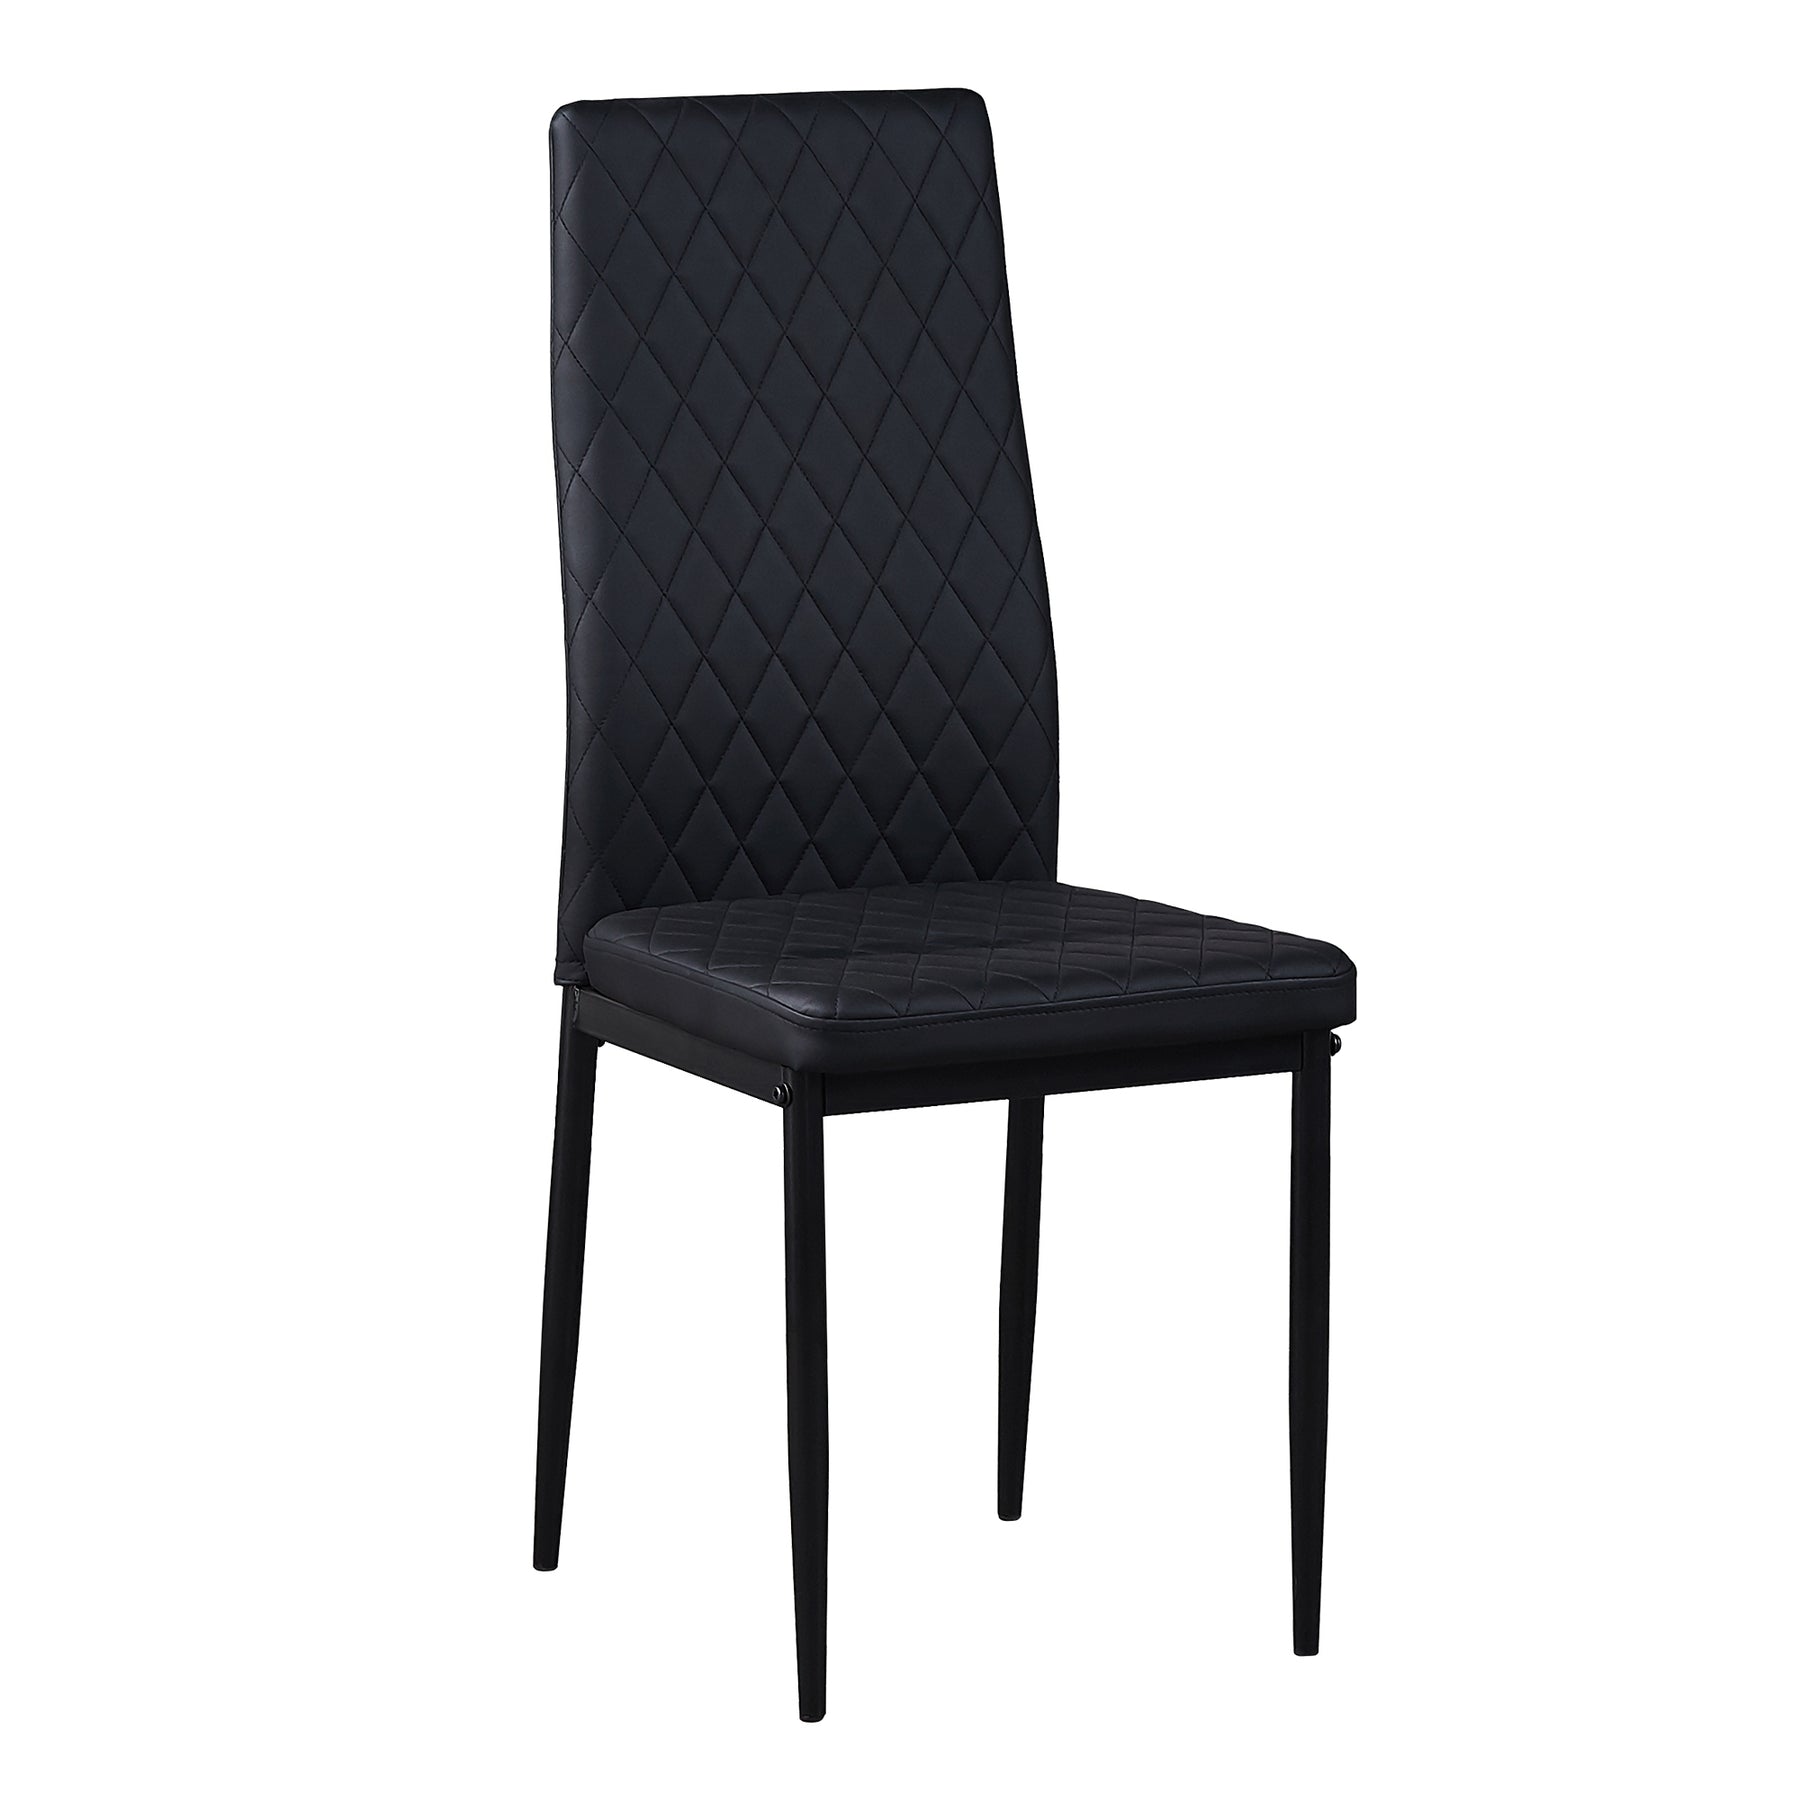 Black modern minimalist dining chair fireproof leather sprayed metal pipe diamond grid pattern restaurant home conference chair set of 4 - Tonkn